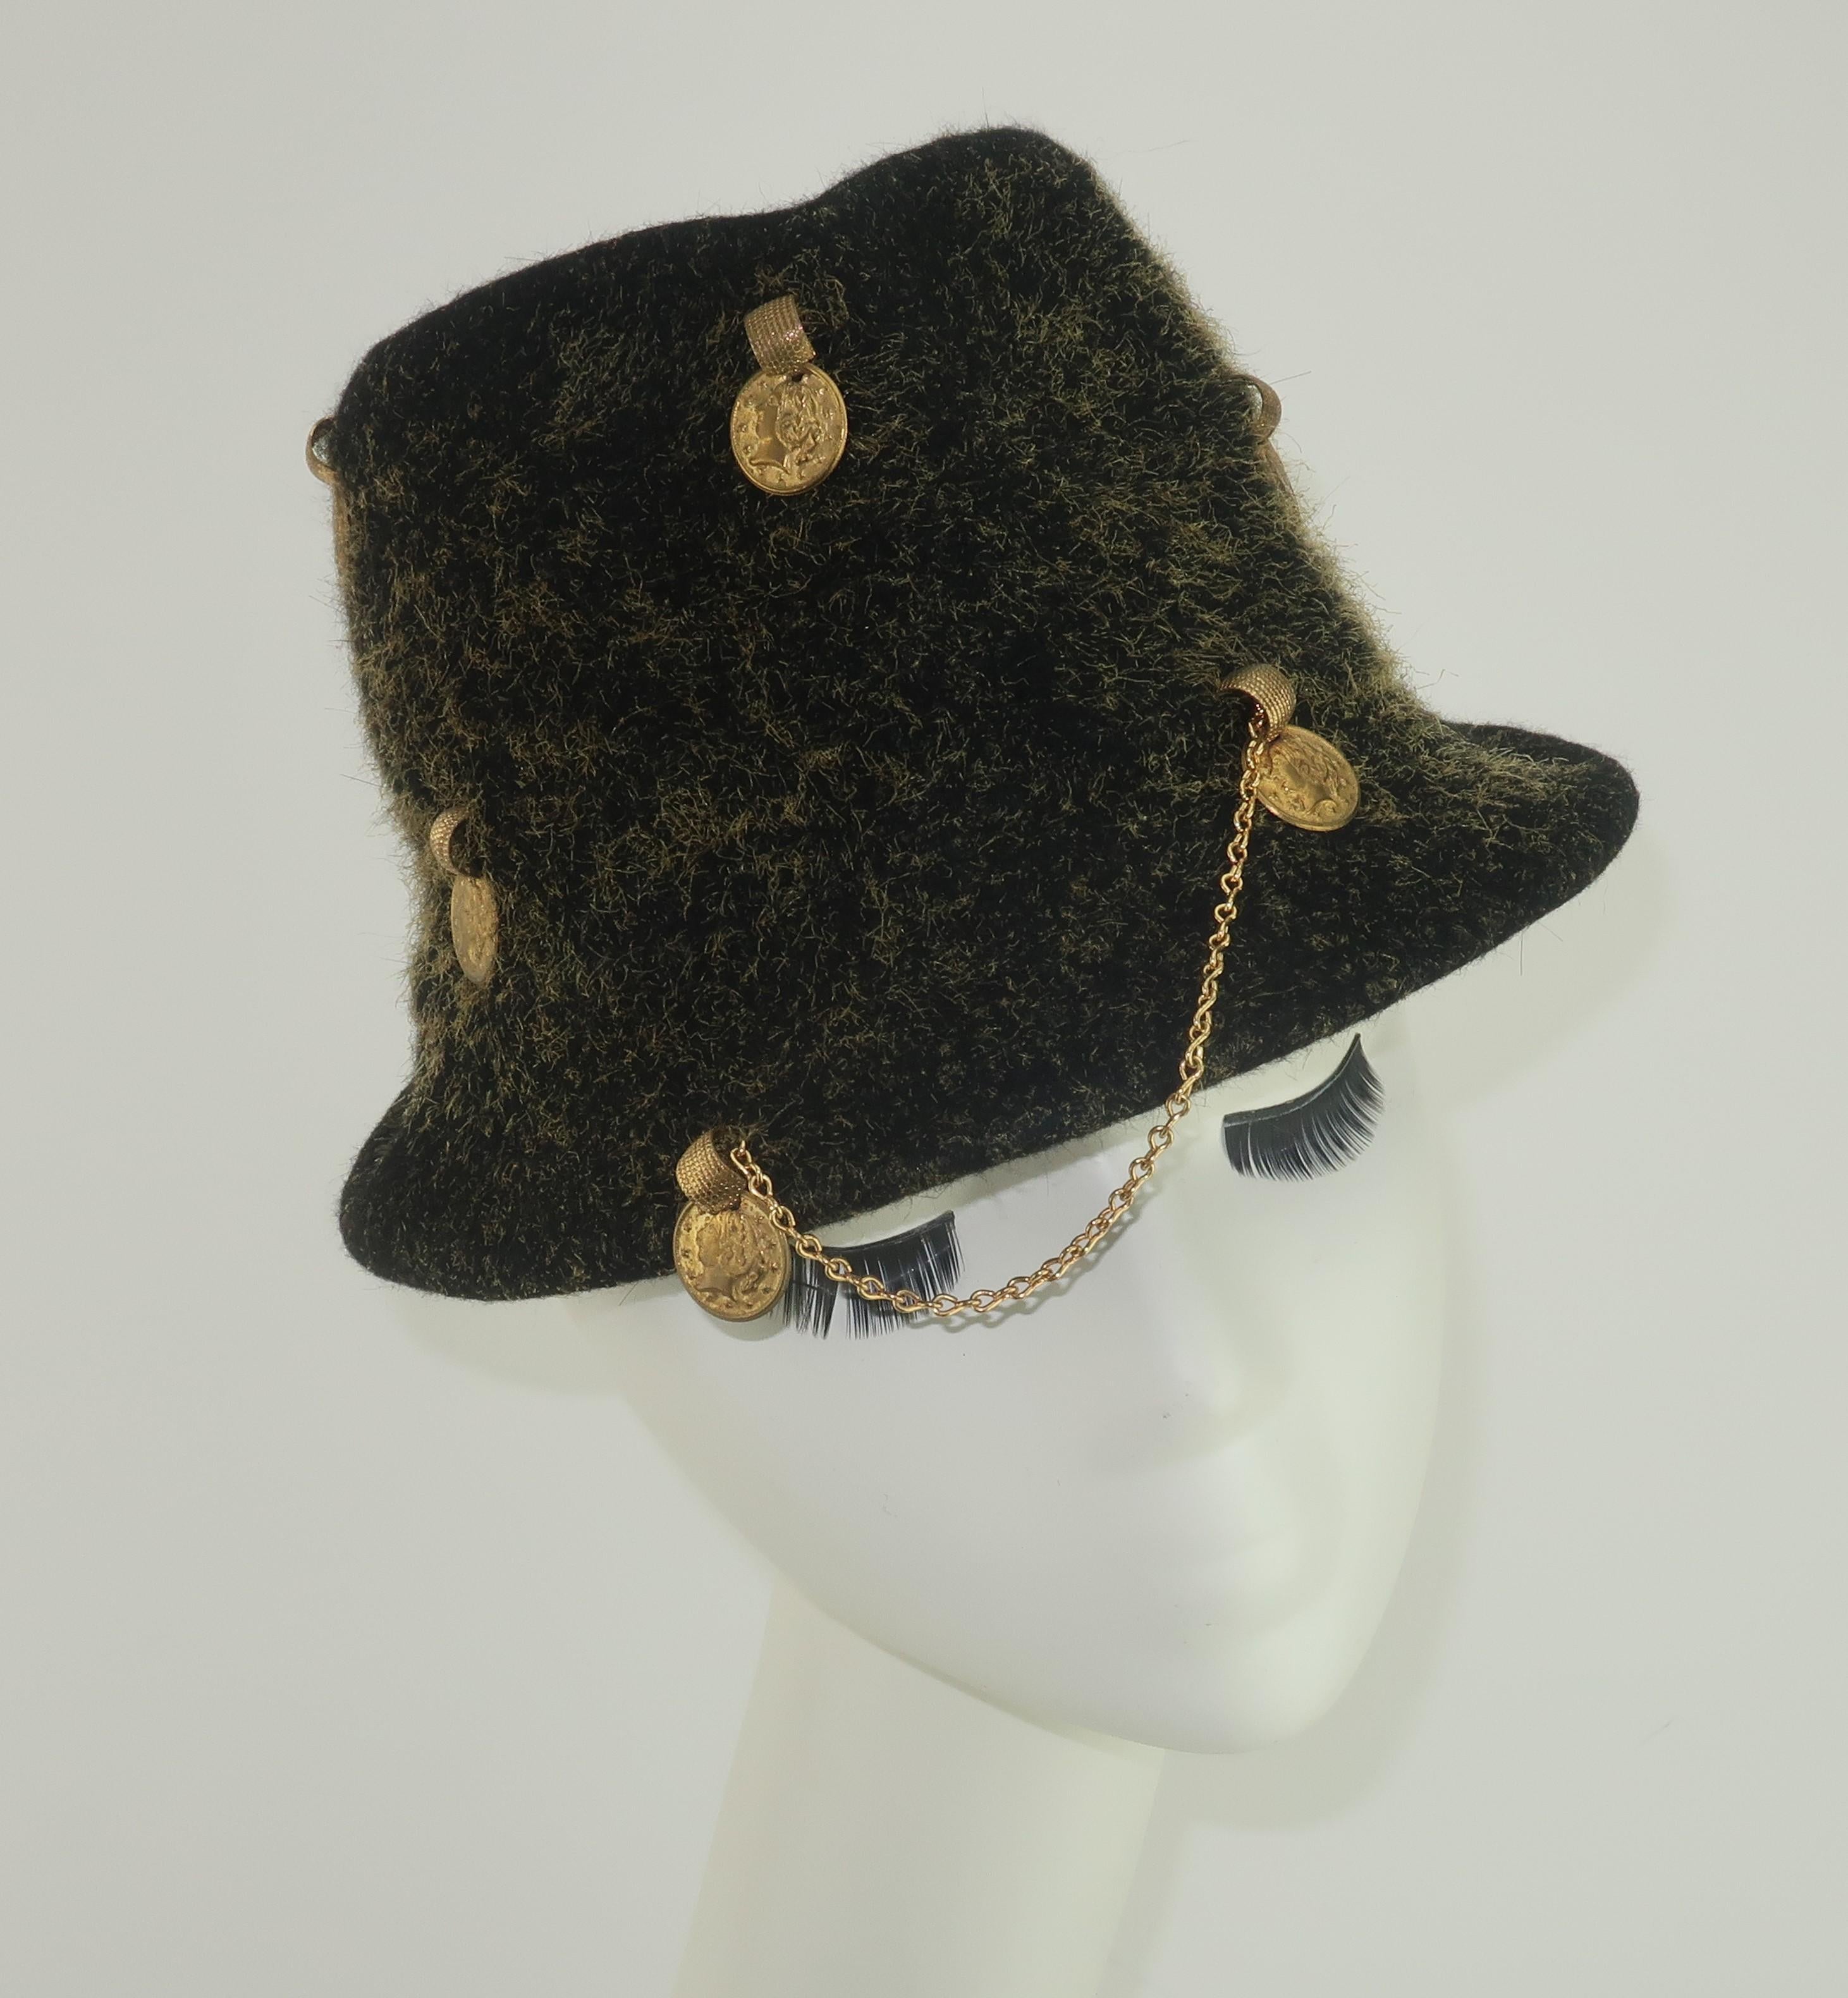 Funky and fabulous 1960's Yves Saint Laurent trilby style hat in a charcoal gray wool with mustard yellow flecks.  The hat is scattered with gold coins attached by coordinating rings and unexpectedly accented by a gold chain at the front brim.  Fun